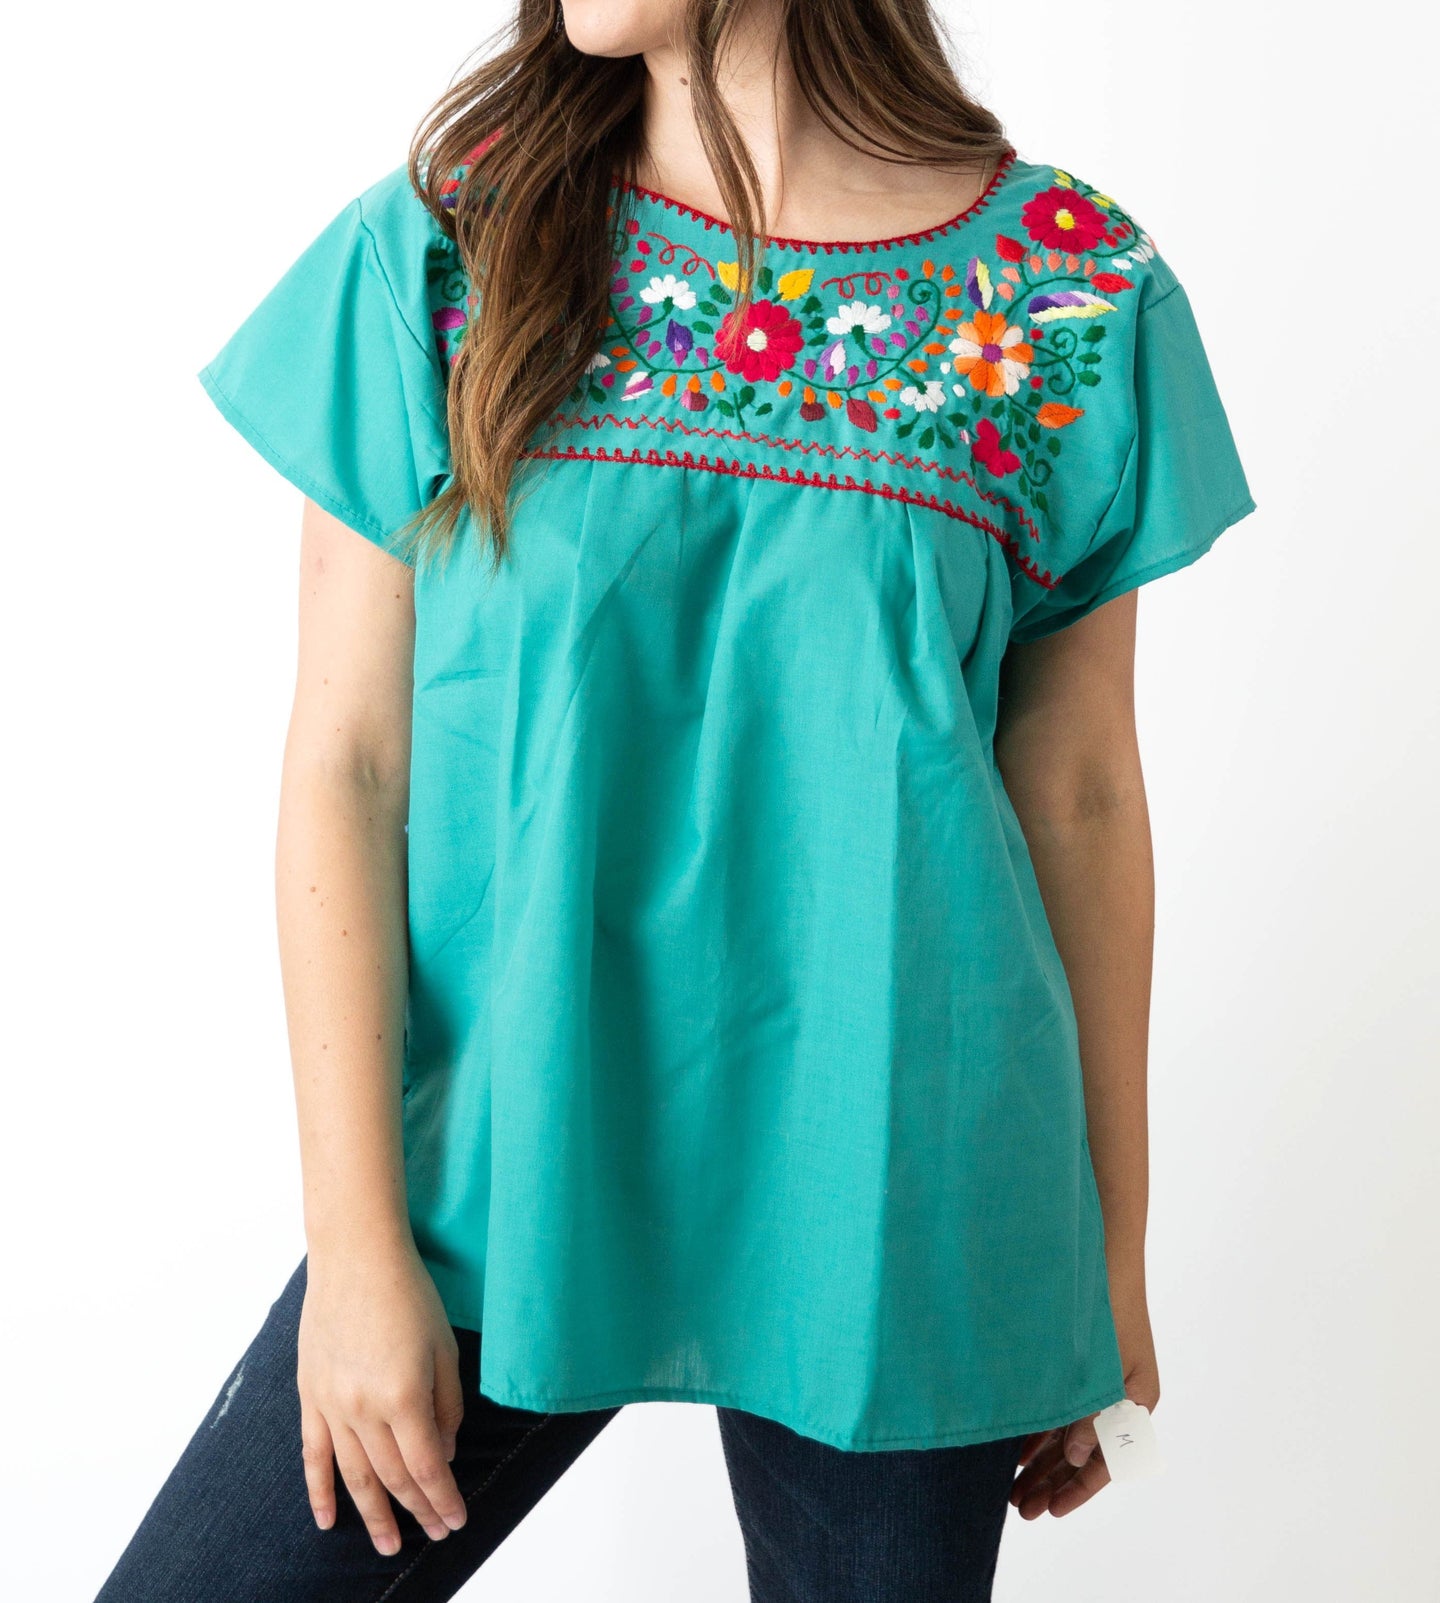 SIDREY Mexican Embroidered Pueblo Blouse - Teal